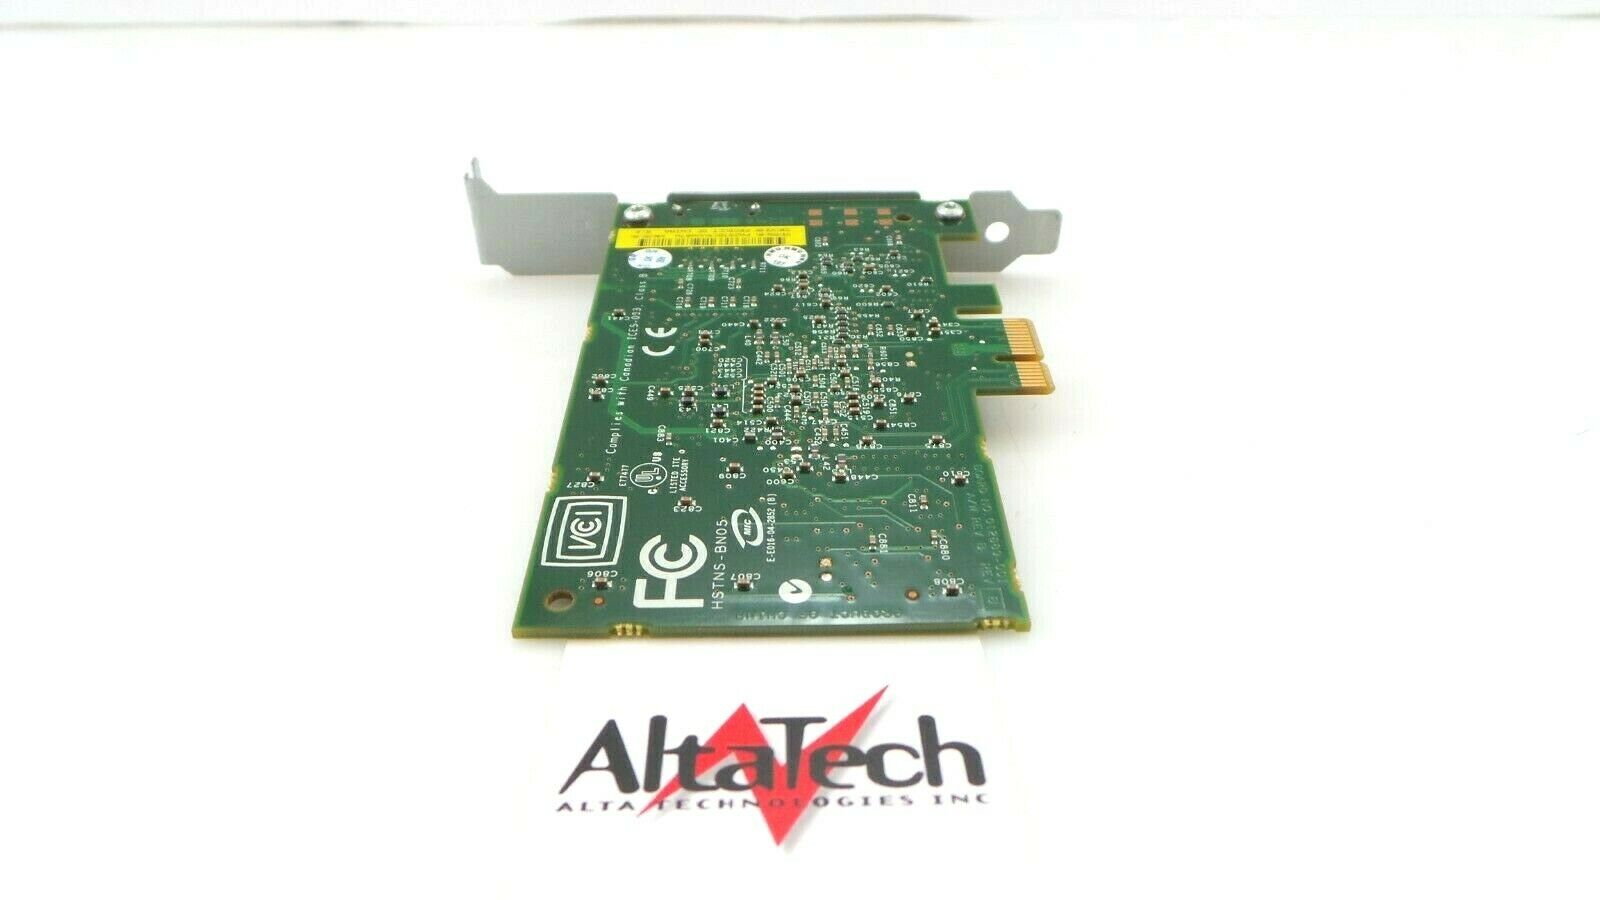 HP 395866-001 1-Port PCIe 10/100/1000T Network Interface Card, Used